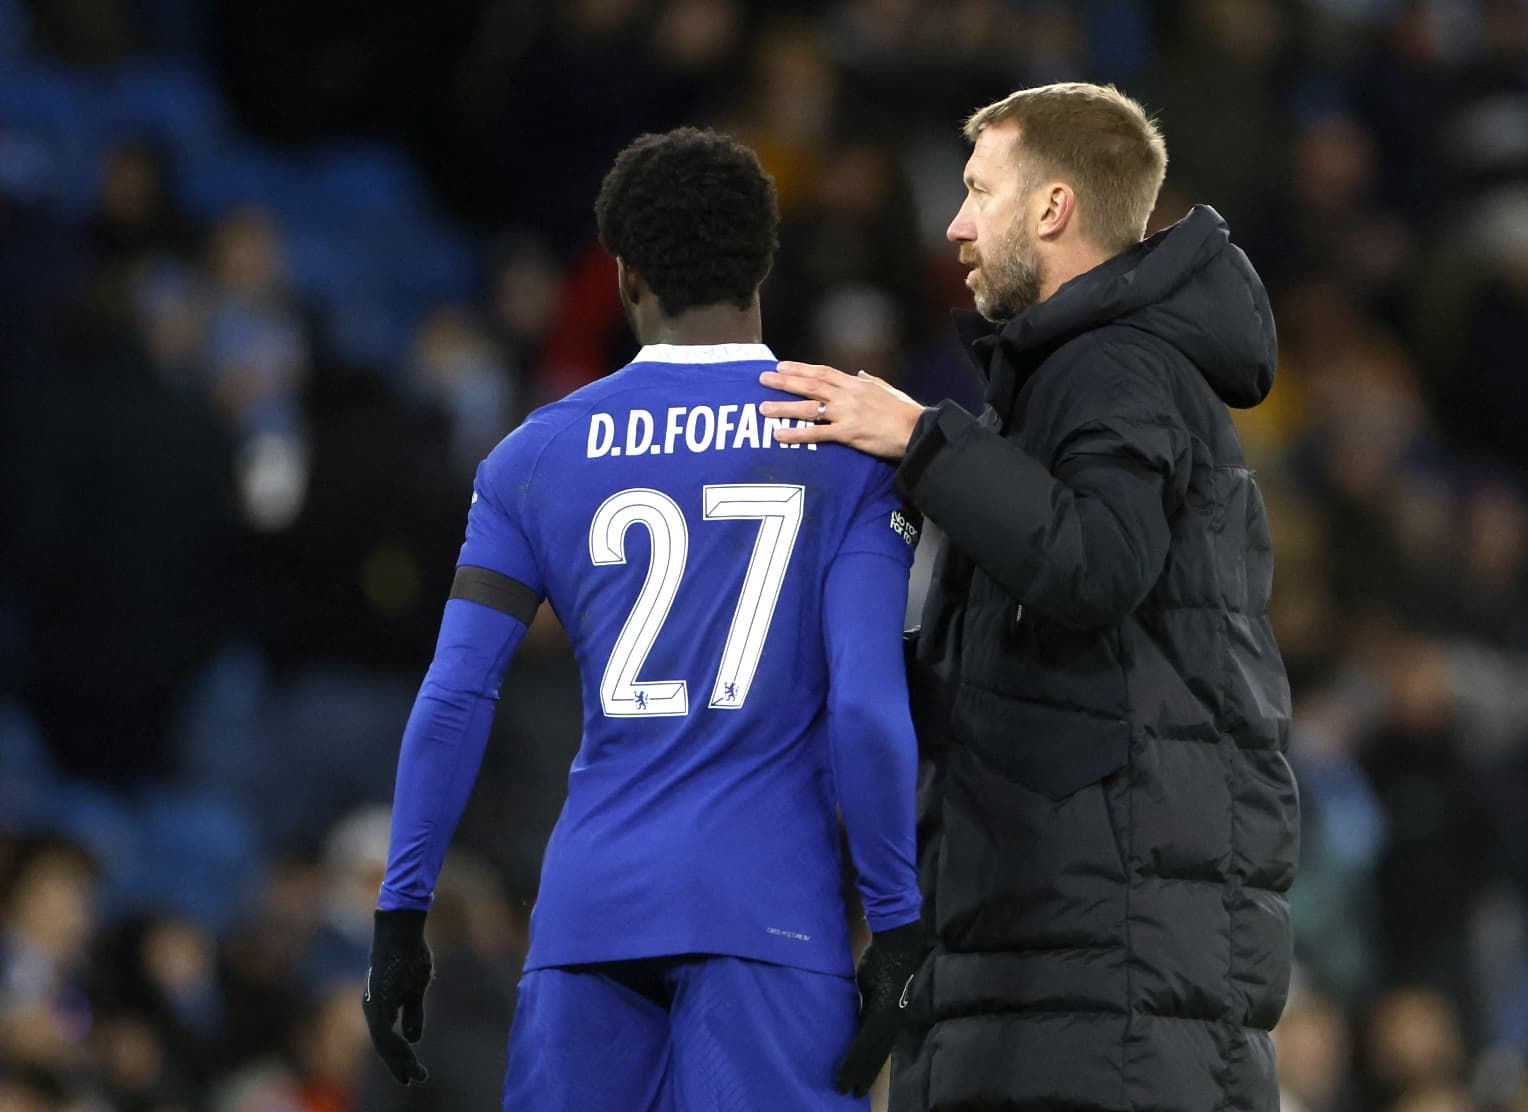  David Datro Fofana is consoled by Chelsea manager Graham Potter after being sent off during the match against Burnley in the Premier League.